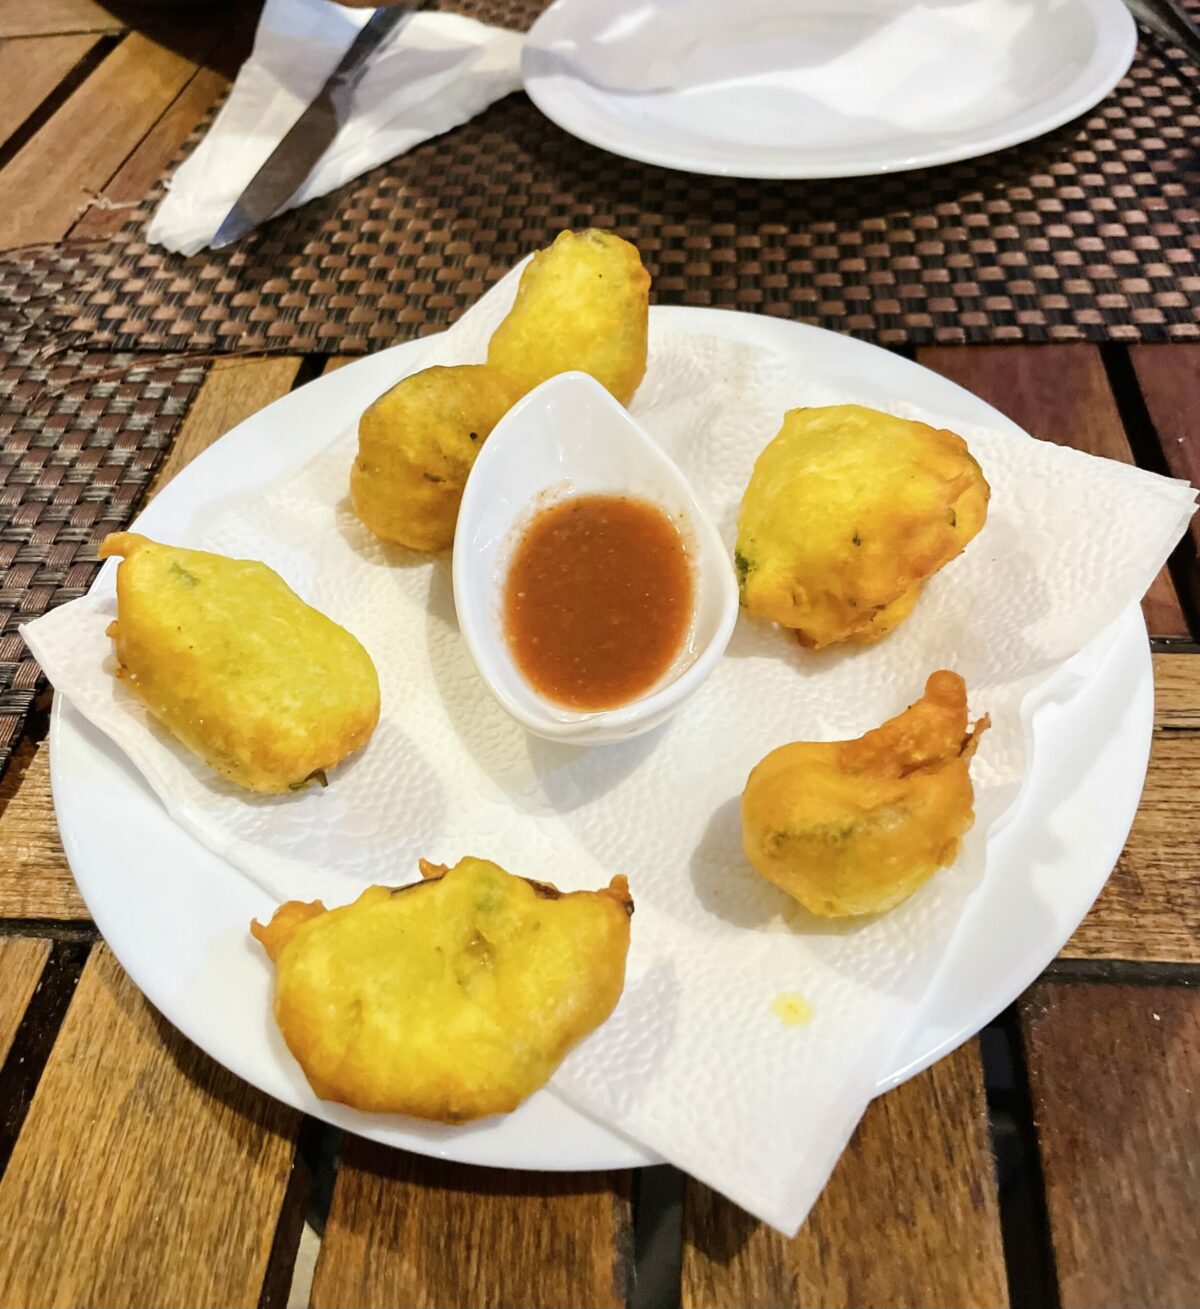 Gato de l'huile - Mauritian potato pakora on a white plate and napkin absorbing excess oil from cakes. Red chili sauce condiment for dipping. At Escale Créole Restaurant in Moka.